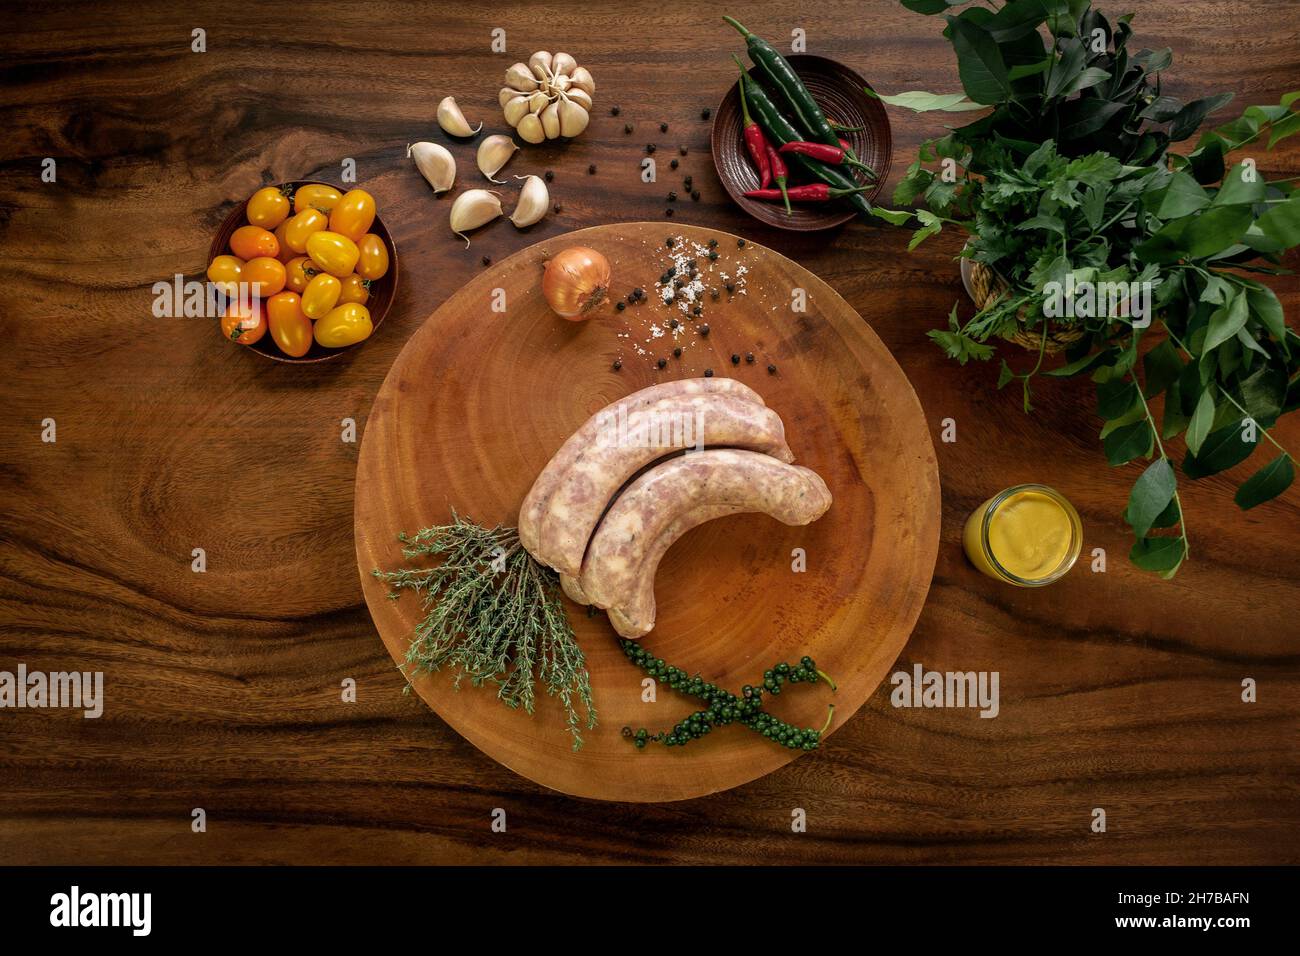 traditional fresh homemade english raw pork sausages on rustic wood table with natural ingredients Stock Photo